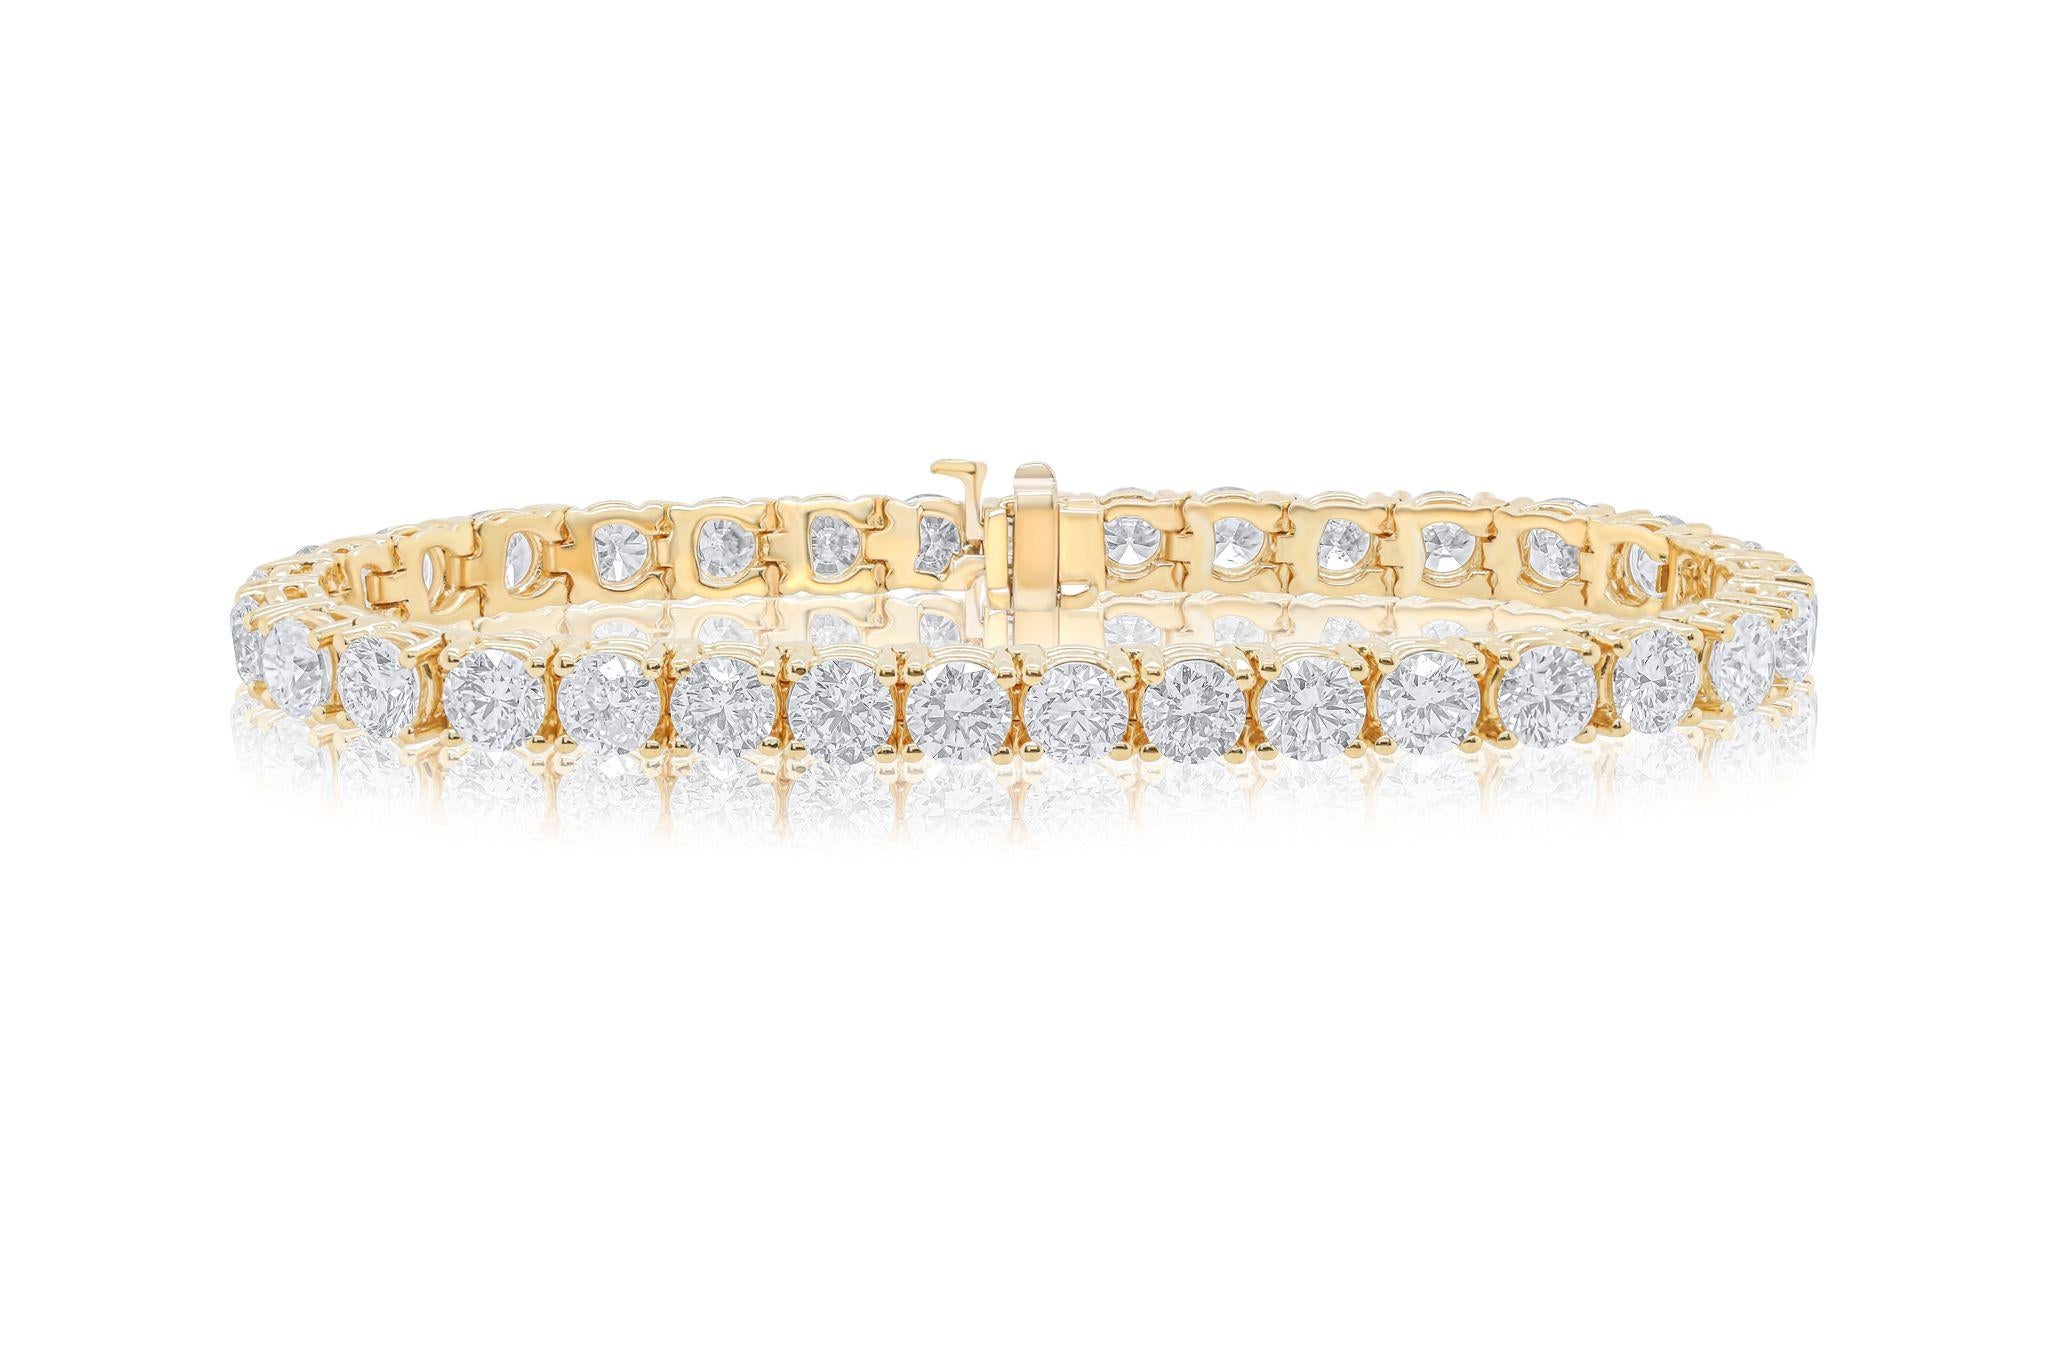 Brilliant Cut Diana M. 18 kt yellow gold 4 prong diamond tennis bracelet adorned with 16.30ct For Sale